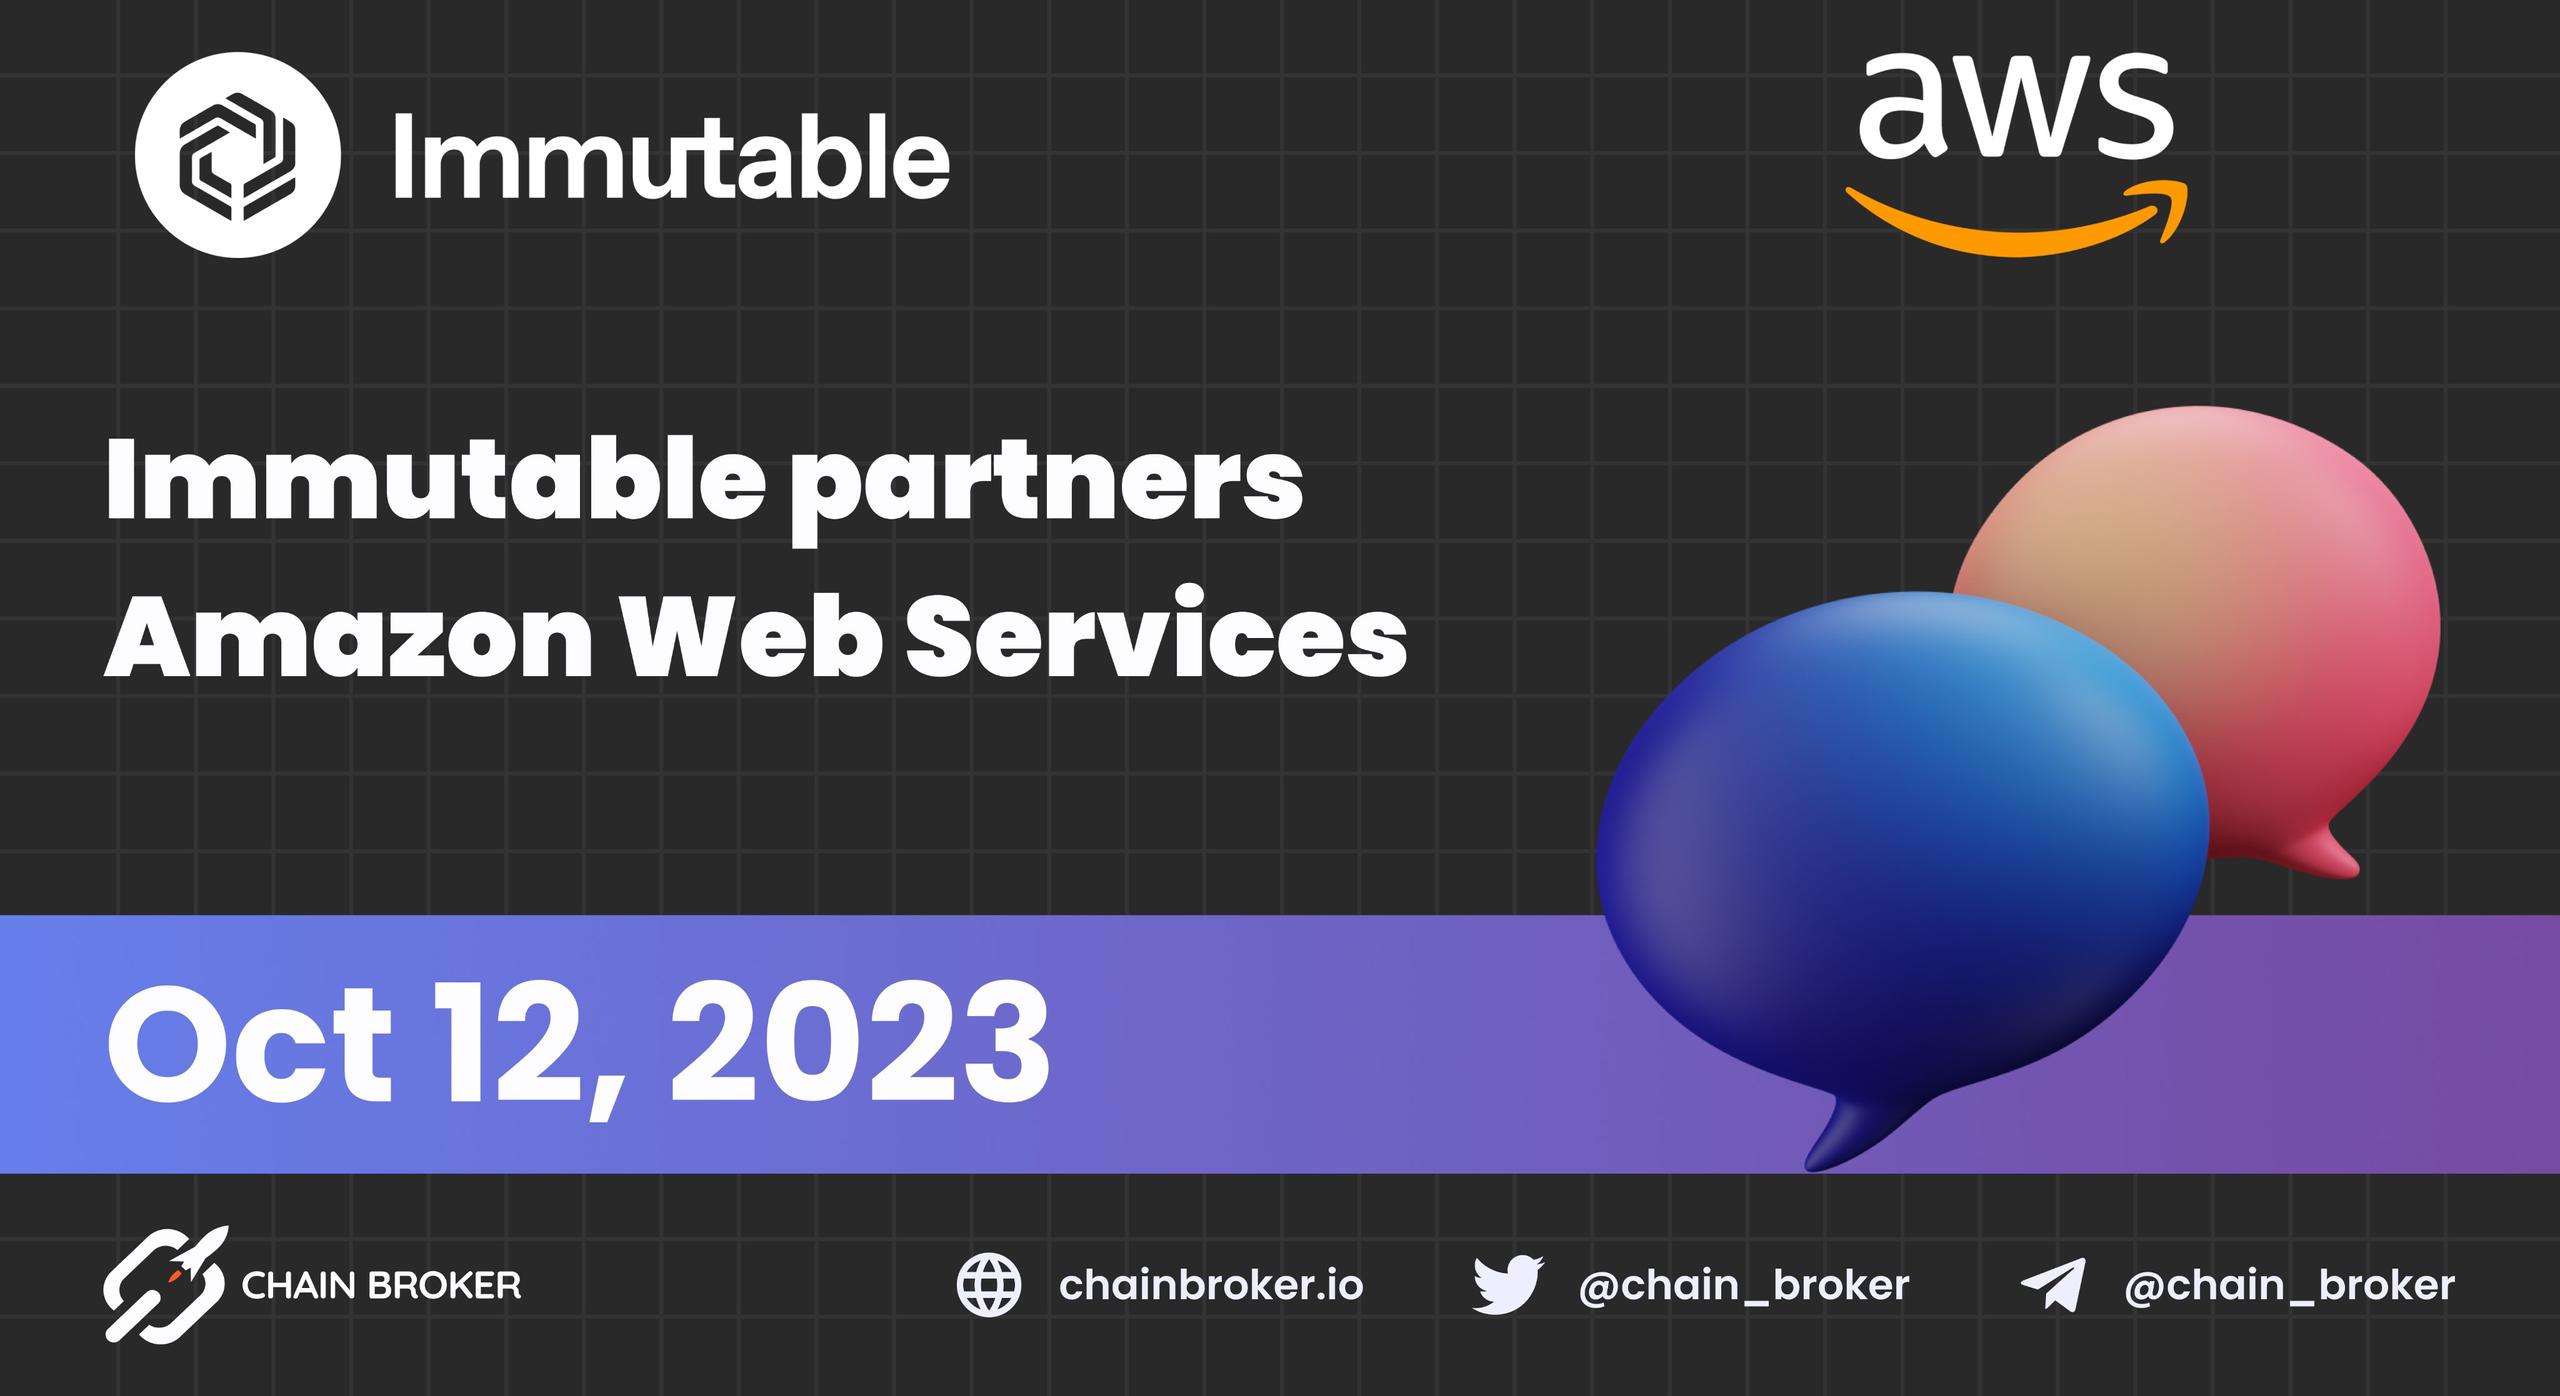 Immutable partners with Amazon Web Services